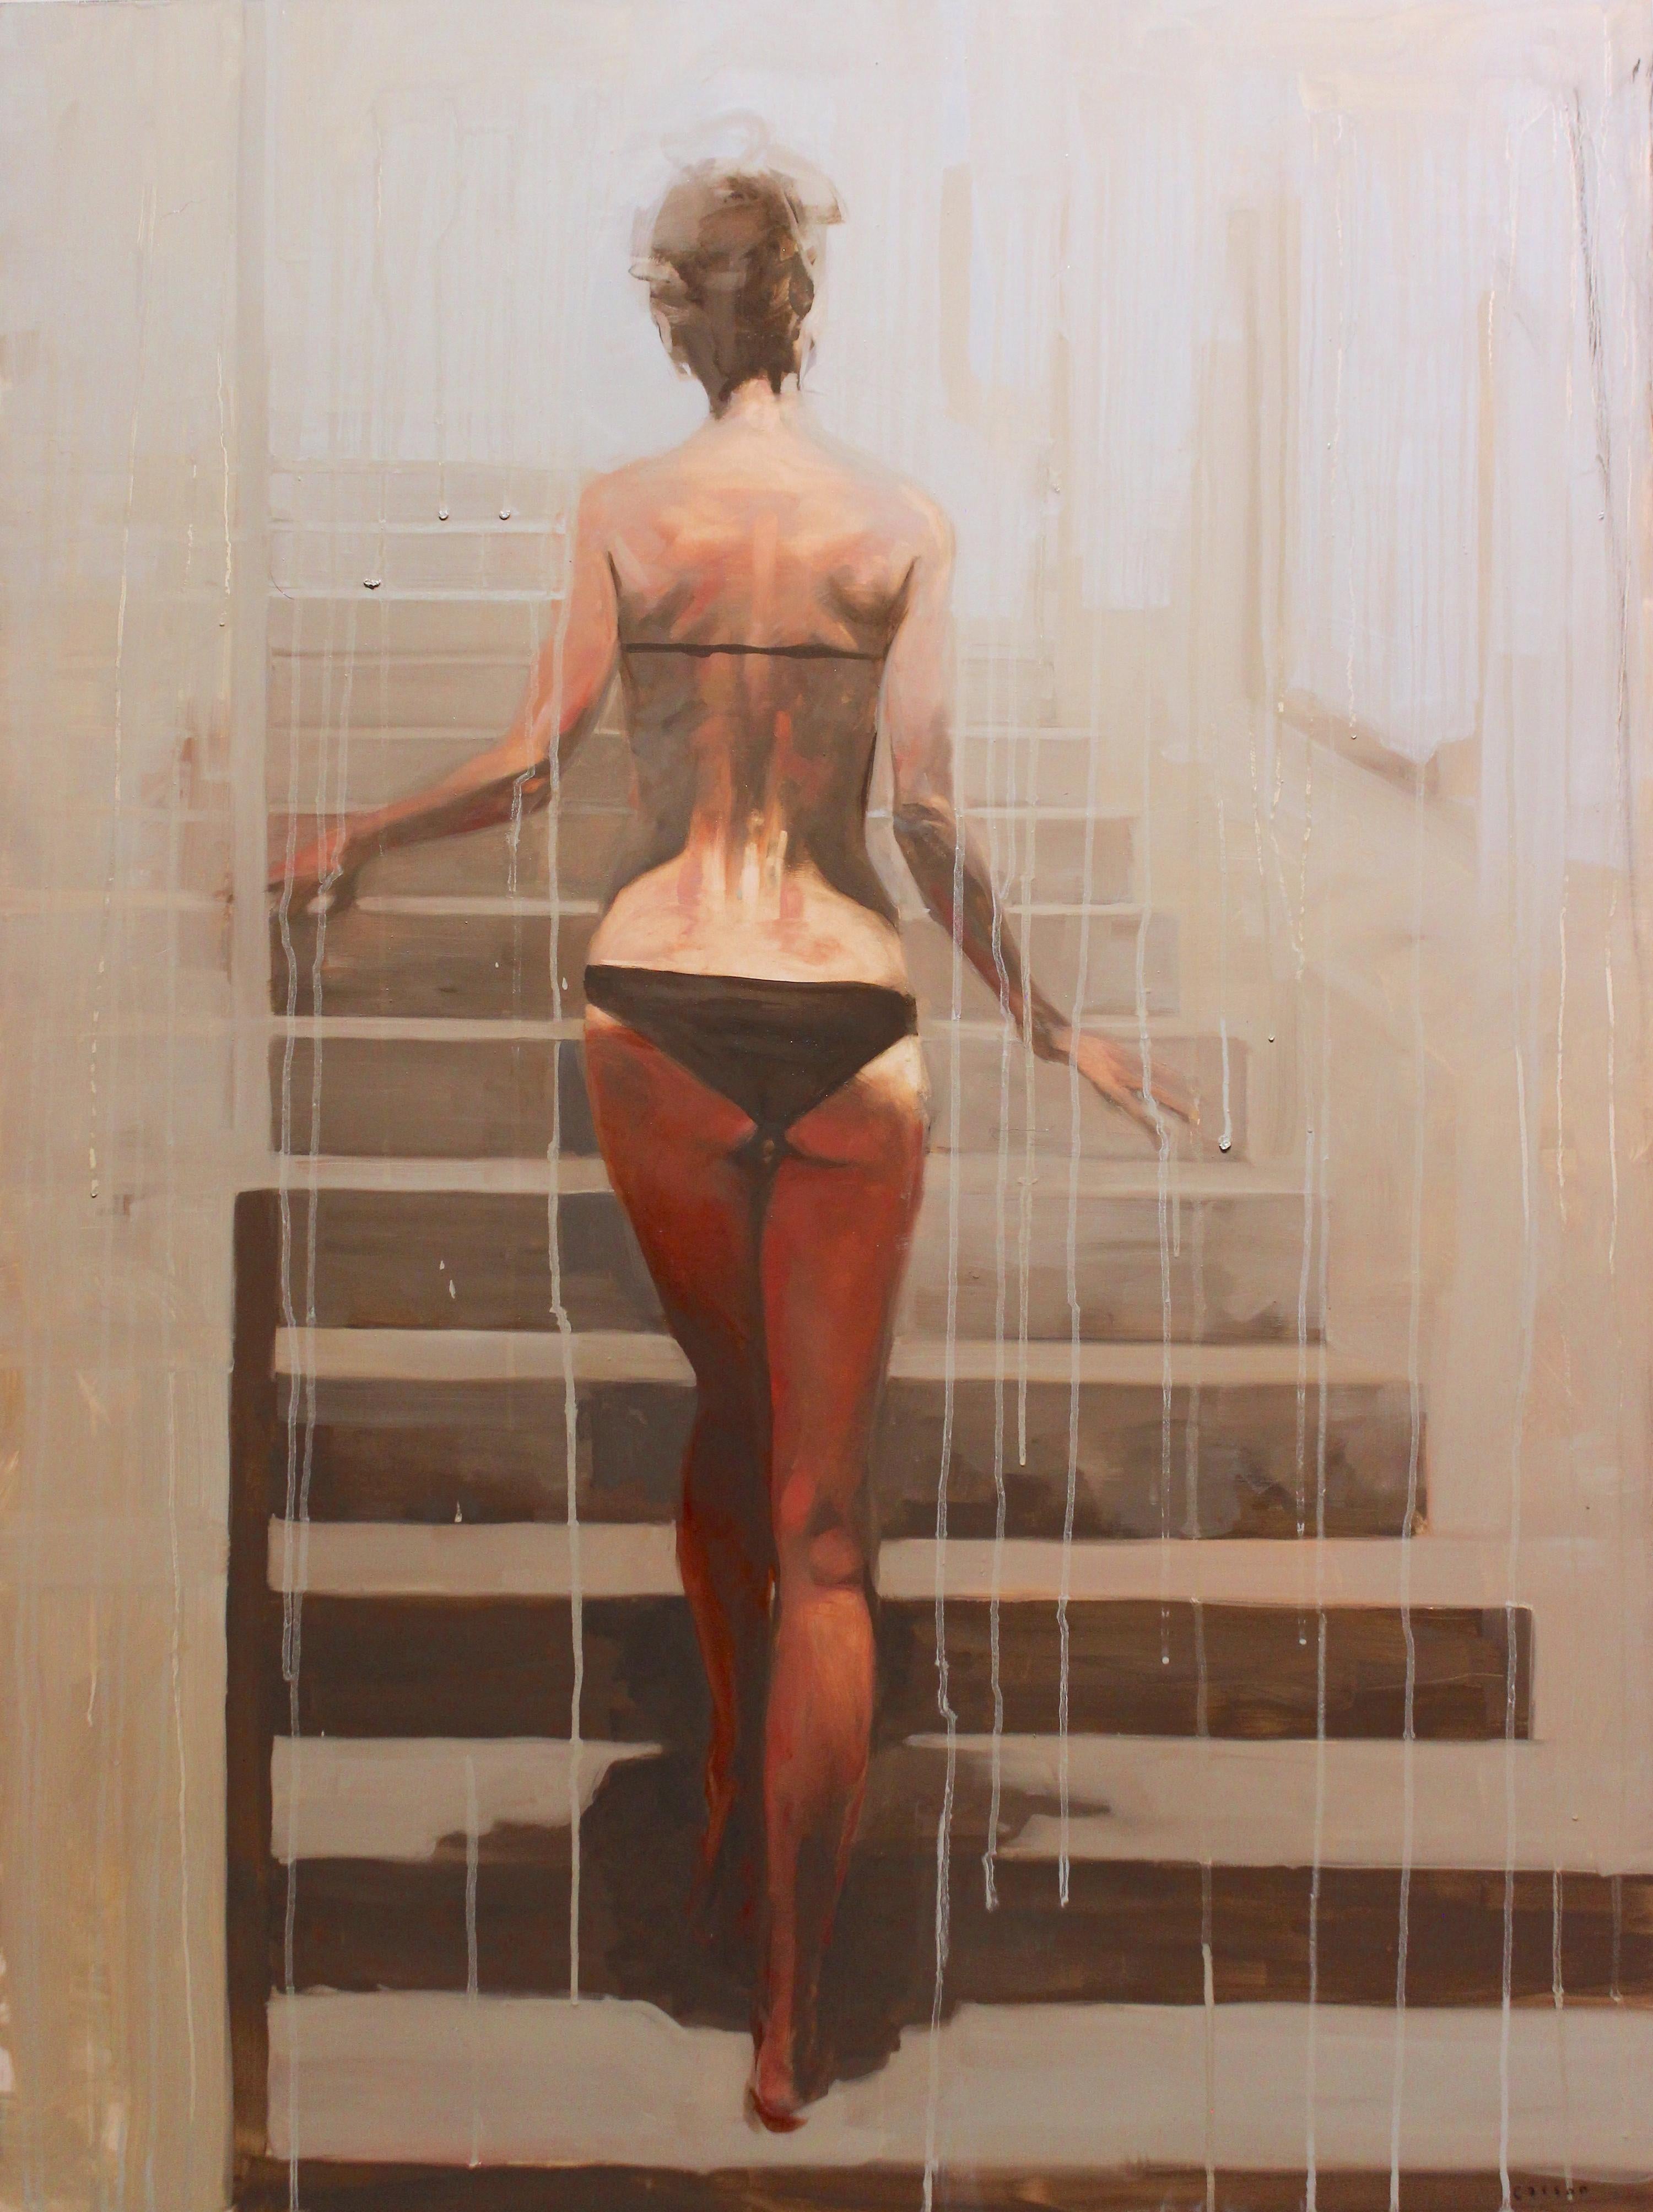 Michael Carson Figurative Painting - "Baby Steps"